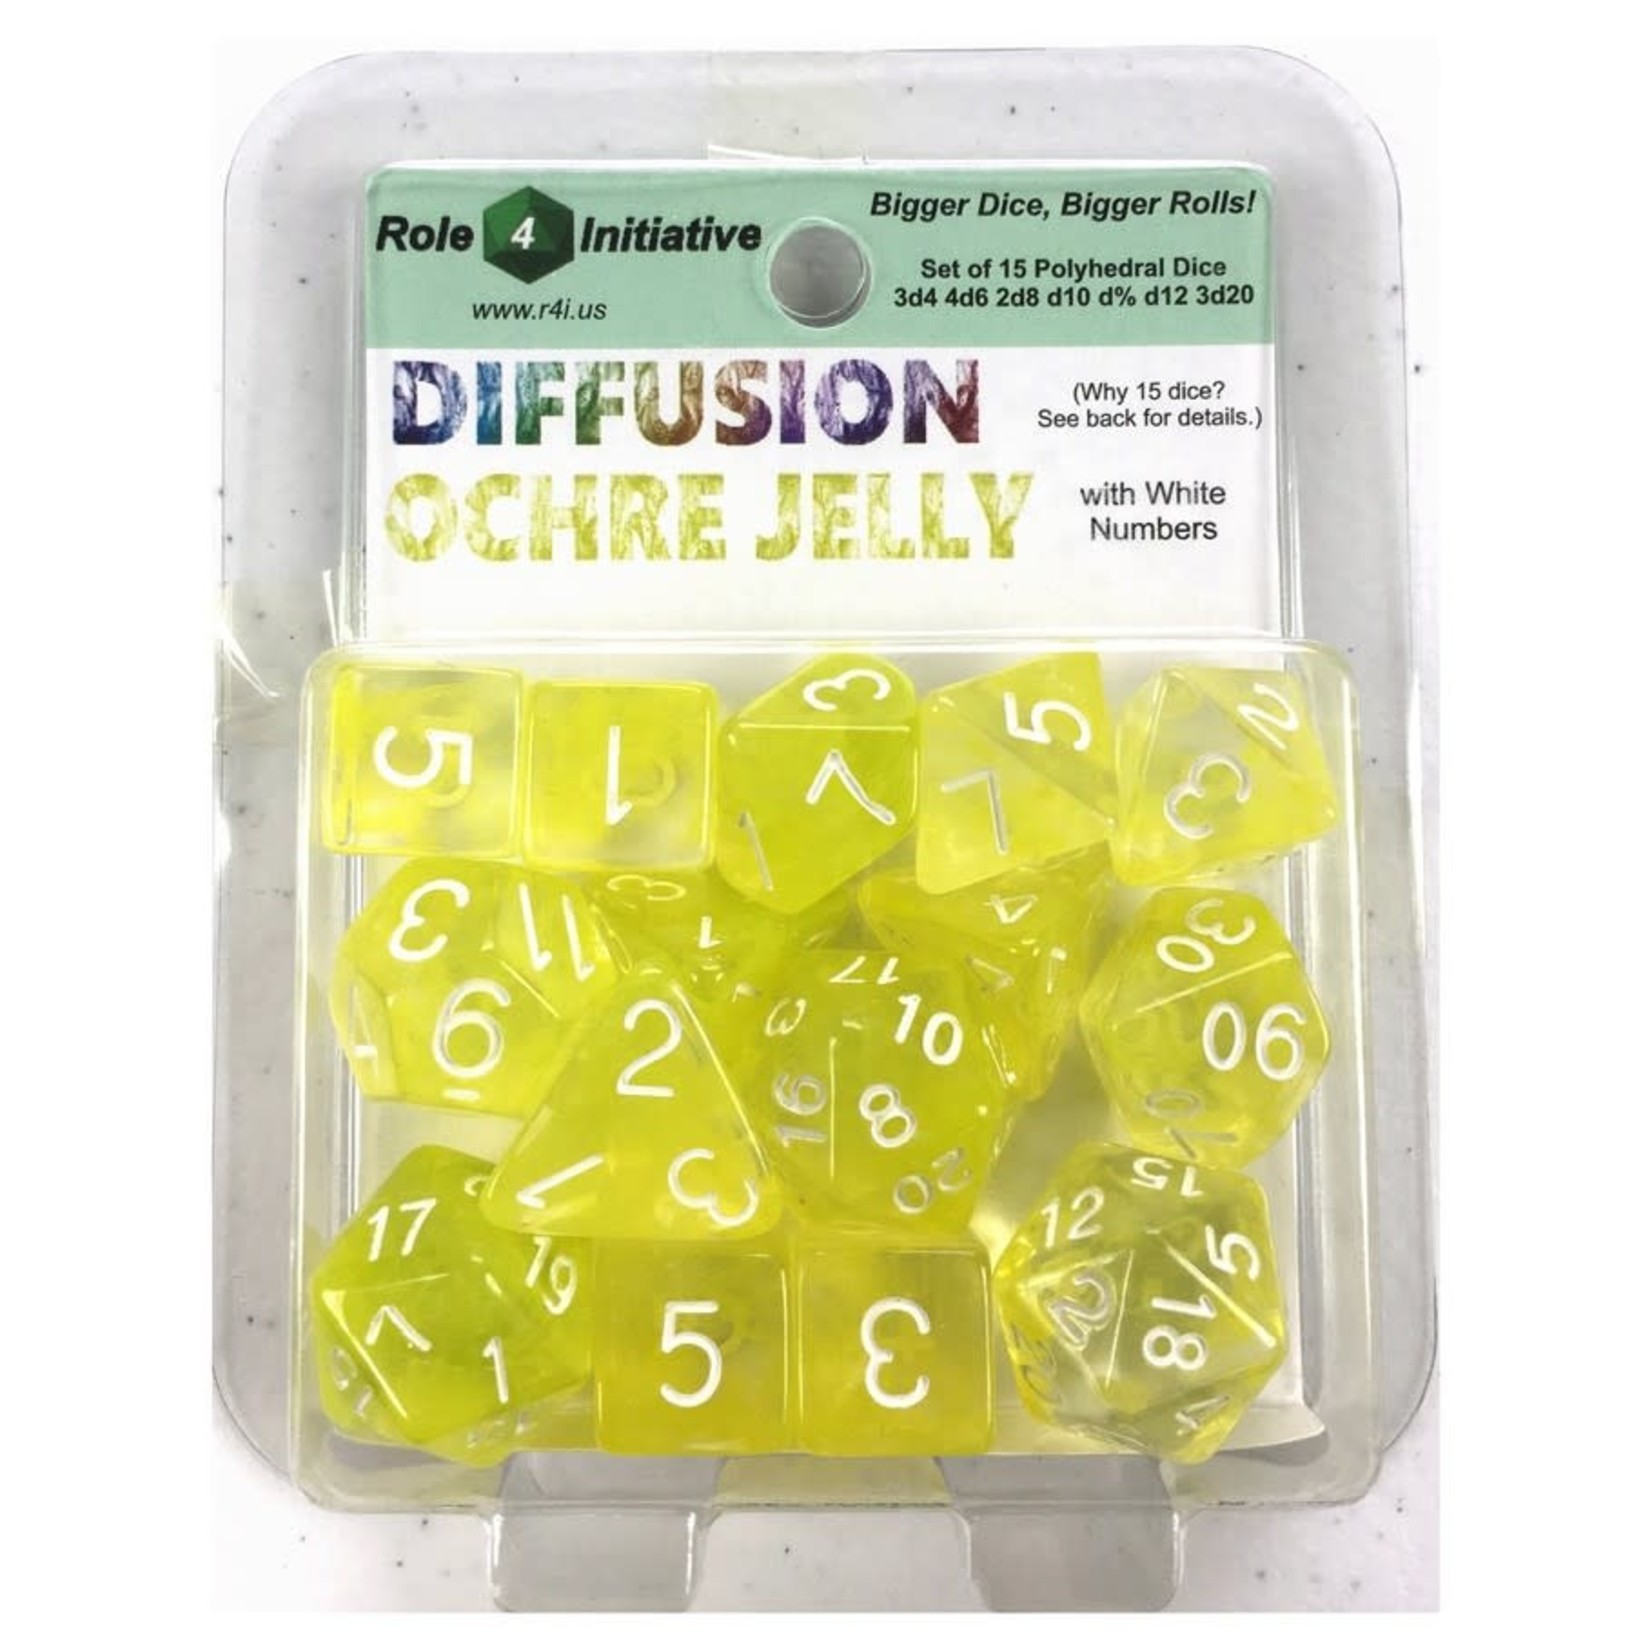 Role 4 Initiative R4I Diffusion Dice: Ochre Jelly (15) Set --Square Box Packaging